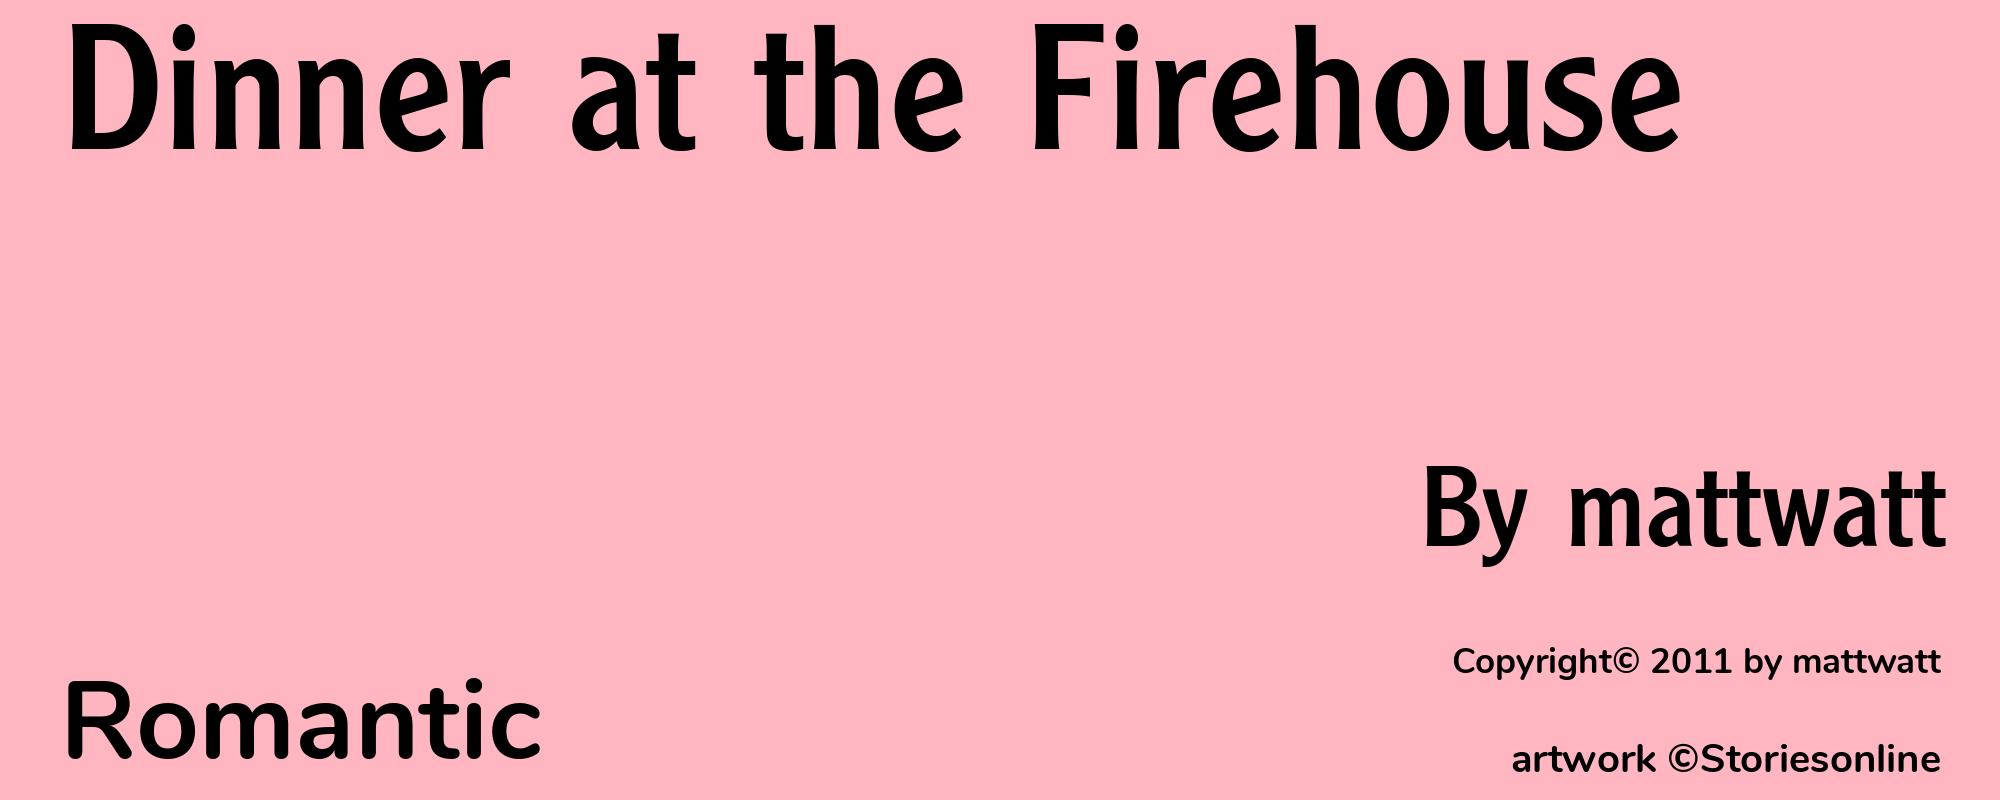 Dinner at the Firehouse - Cover